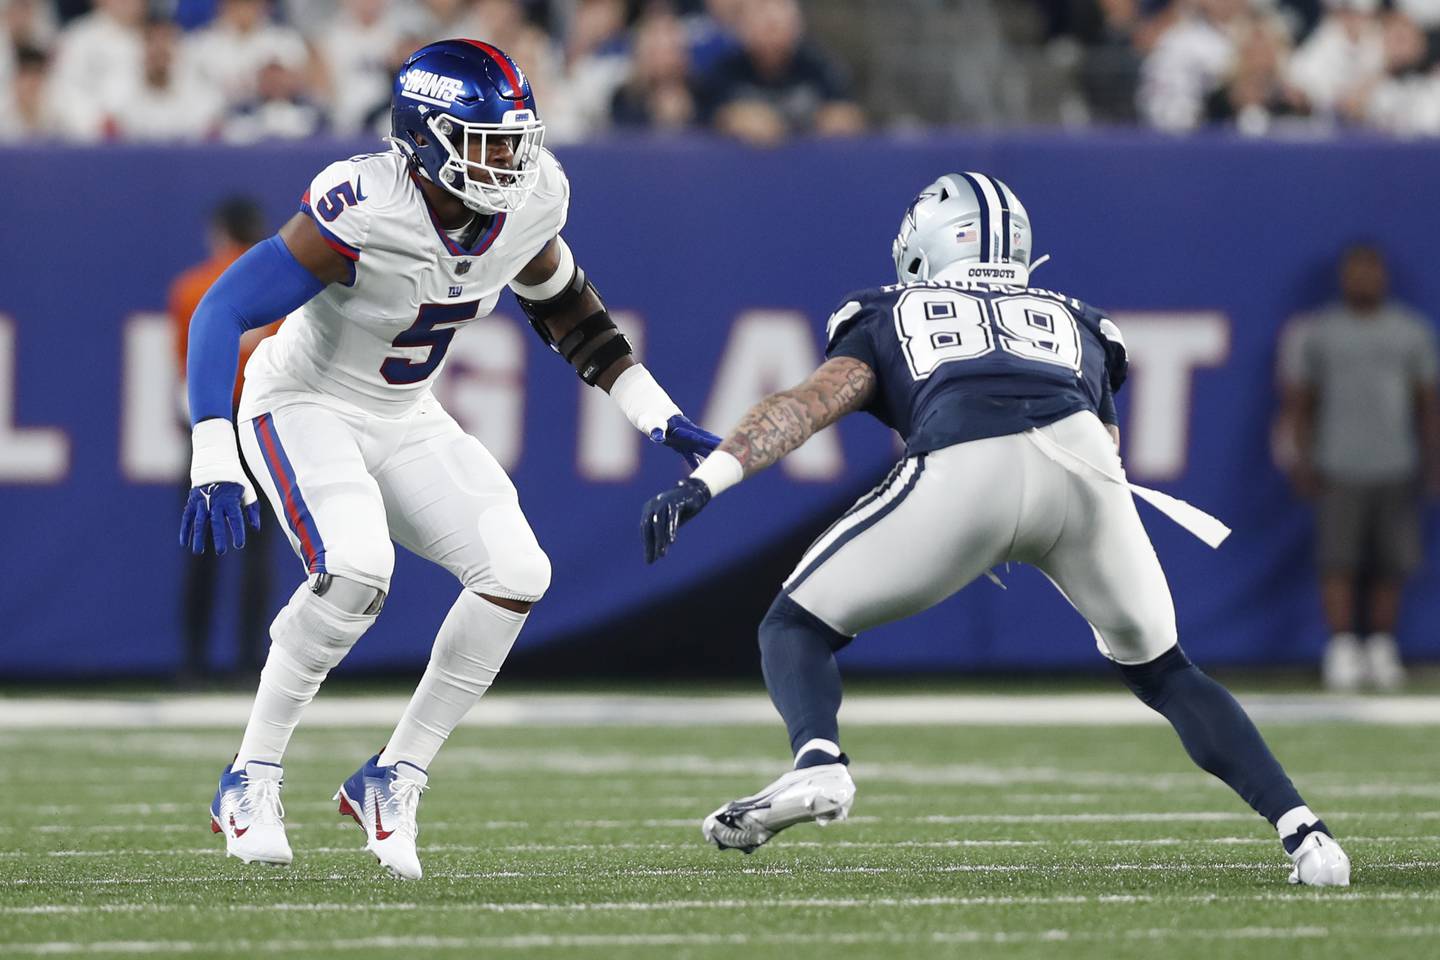 Giants defensive end Kayvon Thibodeaux drops back in coverage against Cowboys tight end Peyton Hendershot on Monday in East Rutherford, N.J. The Cowboys won 23-16. 